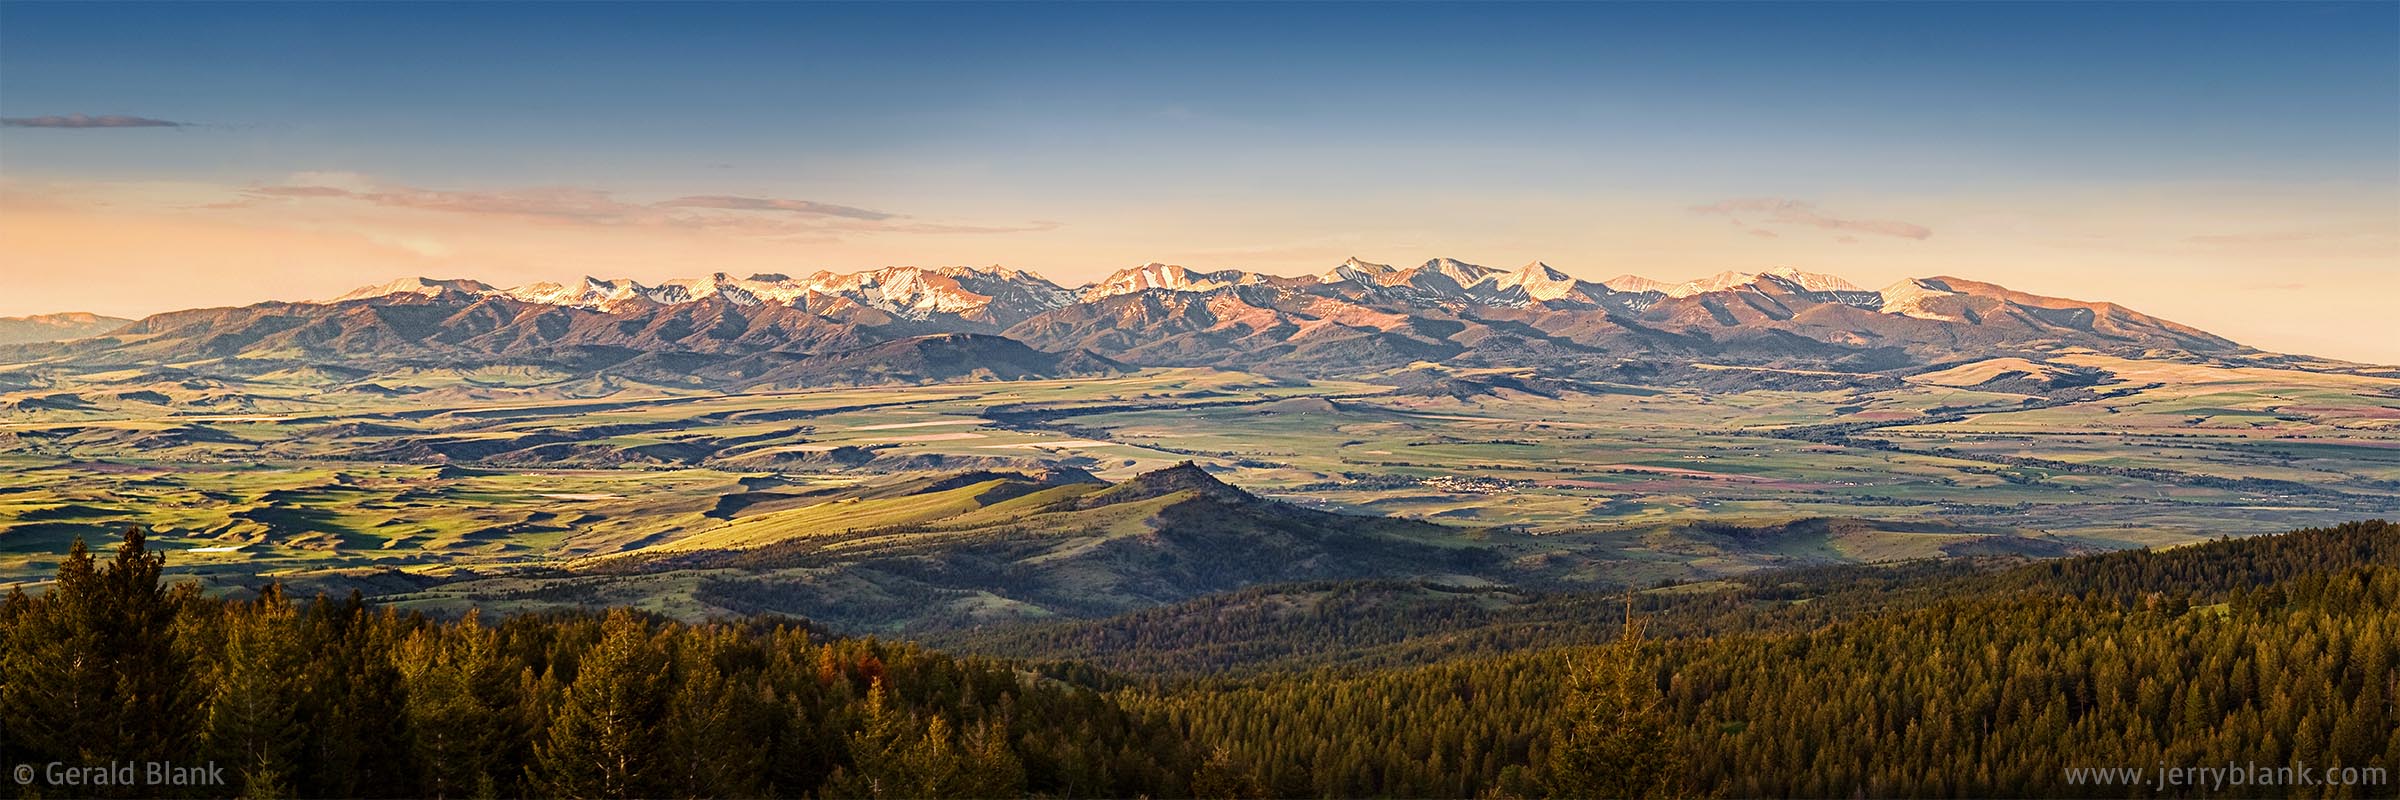 #07945 - Panoramic view of the Crazy Mountains in Montana, captured shortly before sunset in midsummer - photo by Jerry Blank